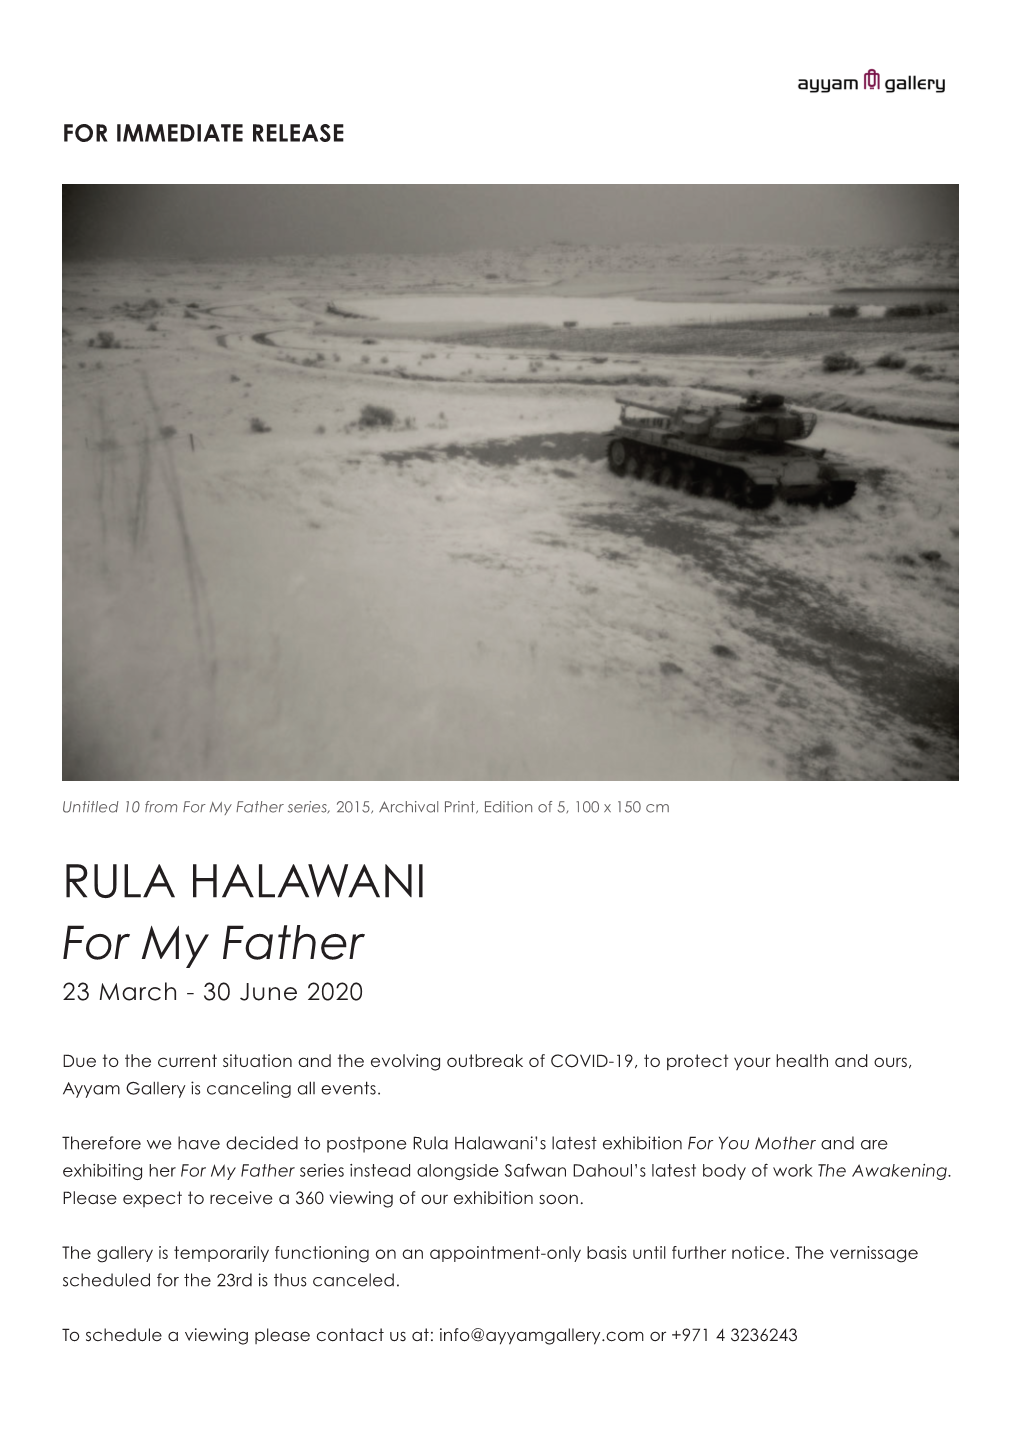 RULA HALAWANI for My Father 23 March - 30 June 2020